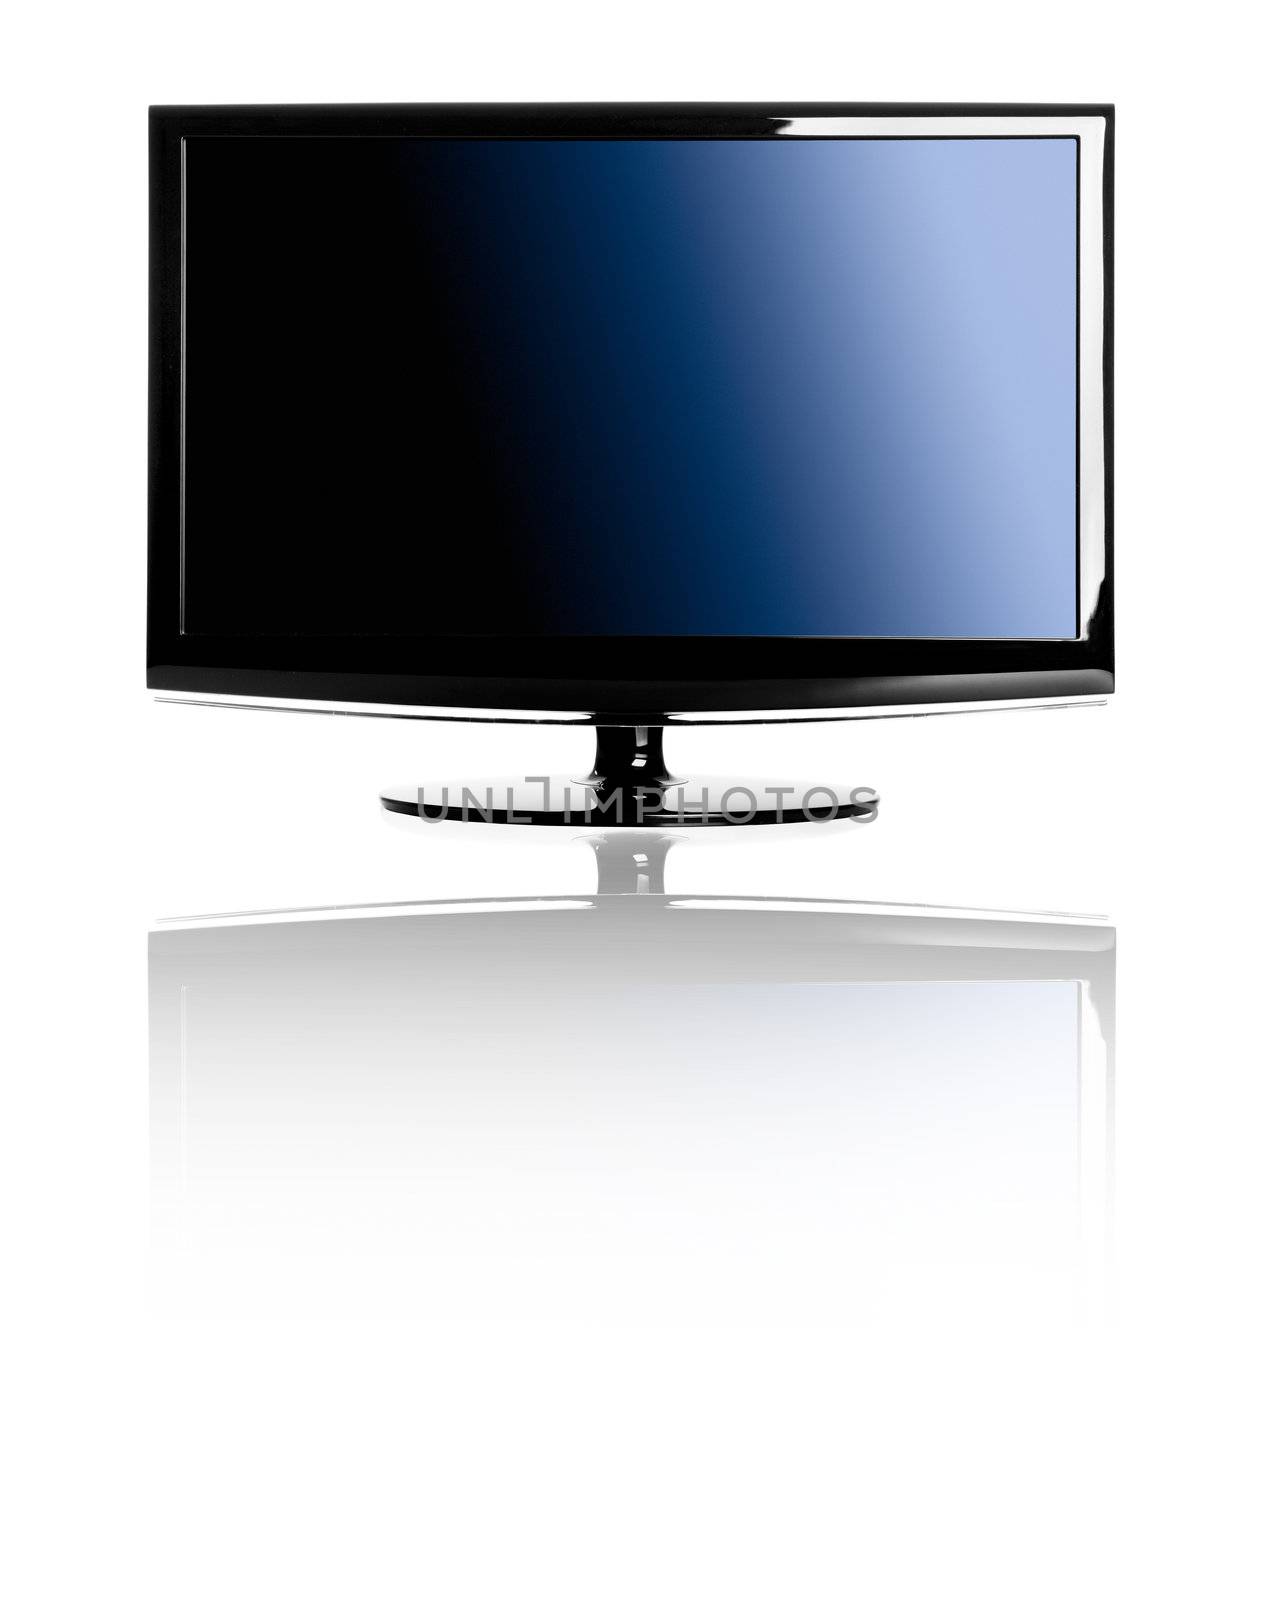 Modern lcd TV isolated over a white background with reflection